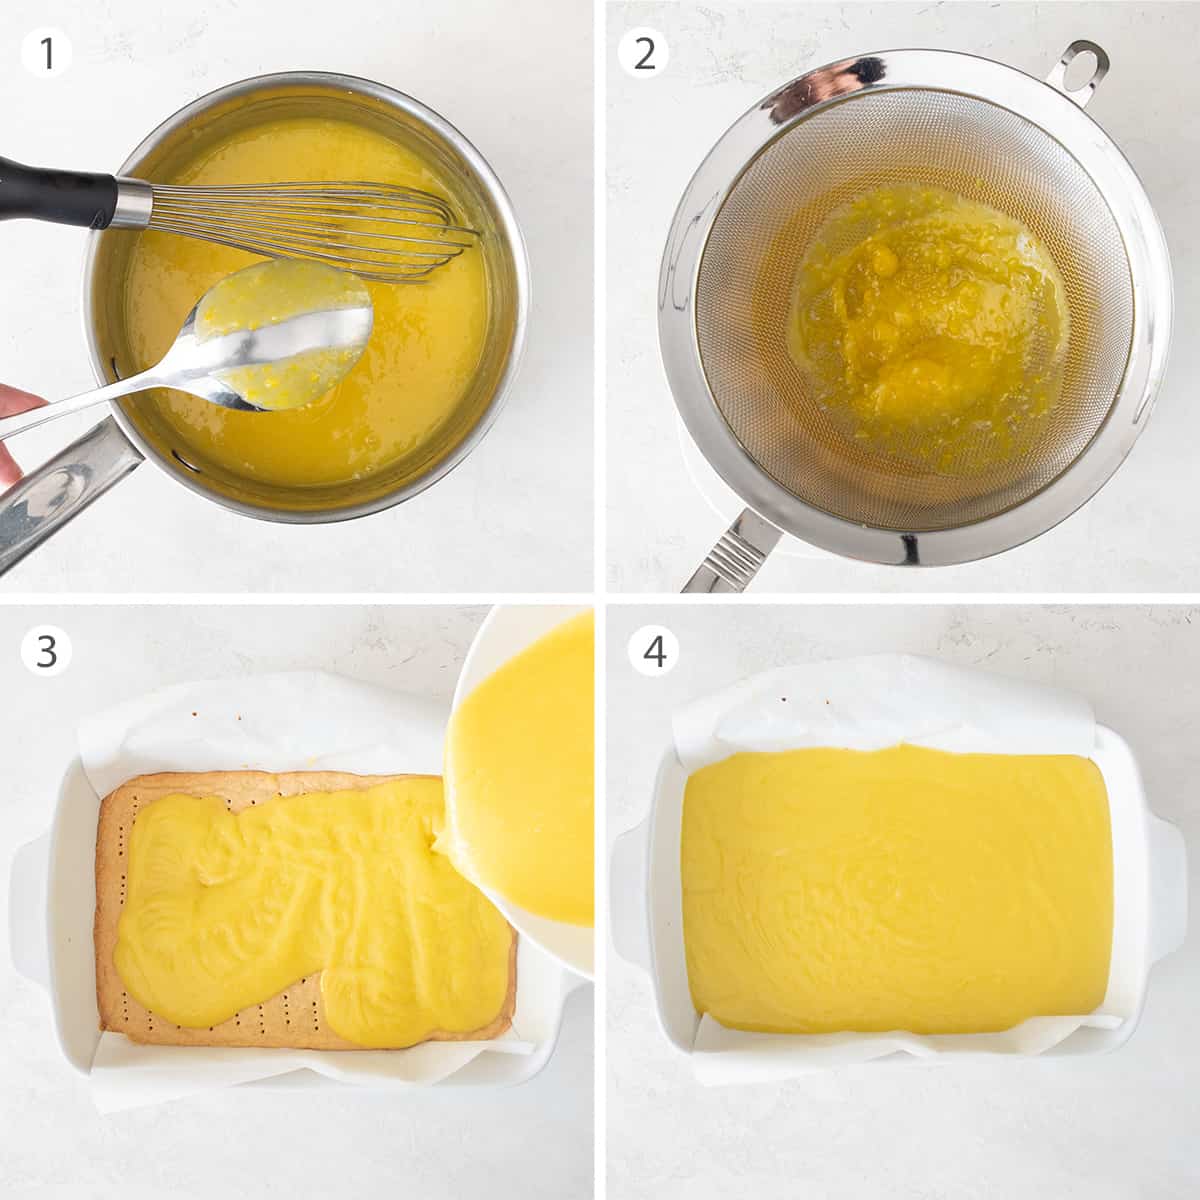 Steps to making lemon curd including cooking, straining, and pouring the topping over a baked crust.